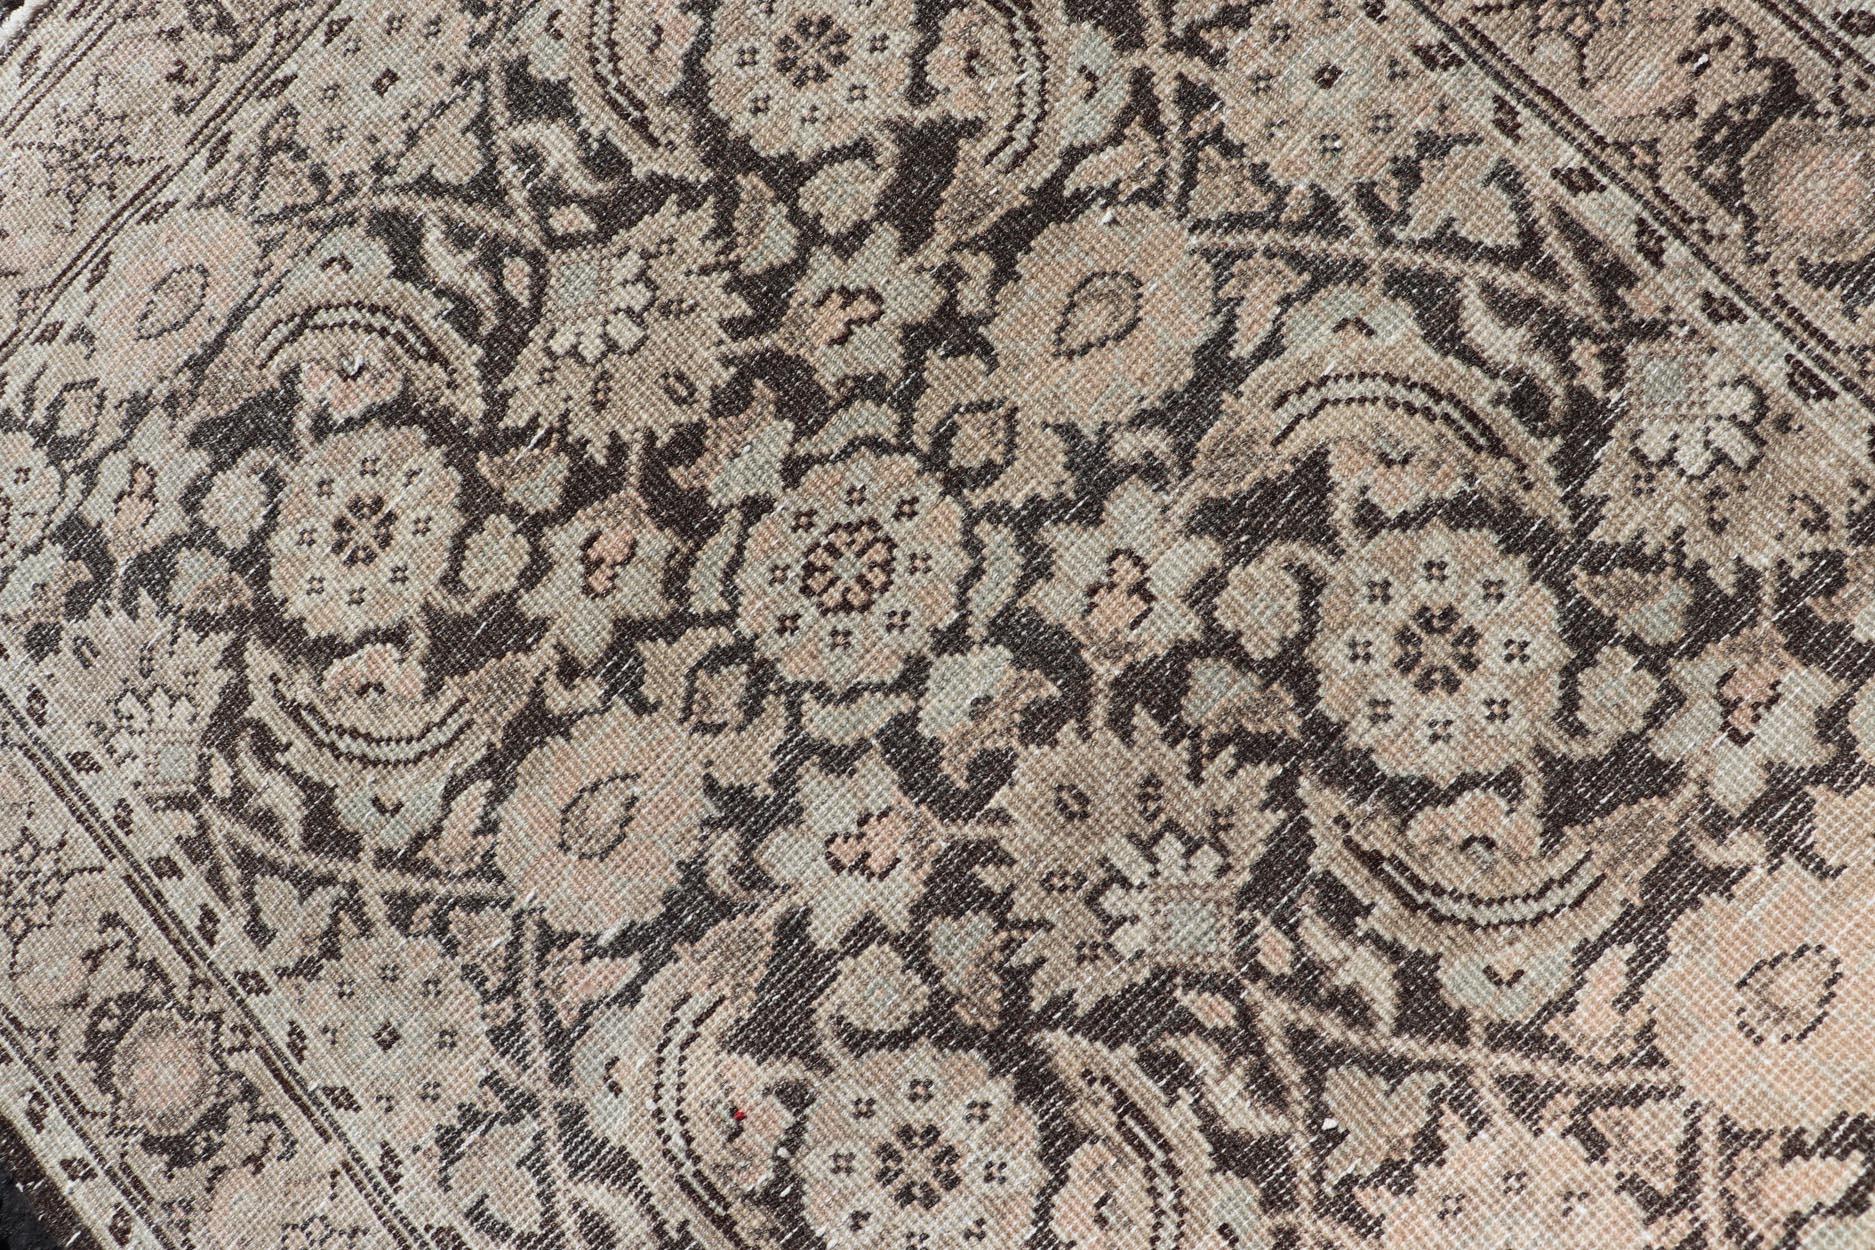 Wool Antique Persian Tabriz Runner with Ornate Floral Design in Earthy Tones  For Sale